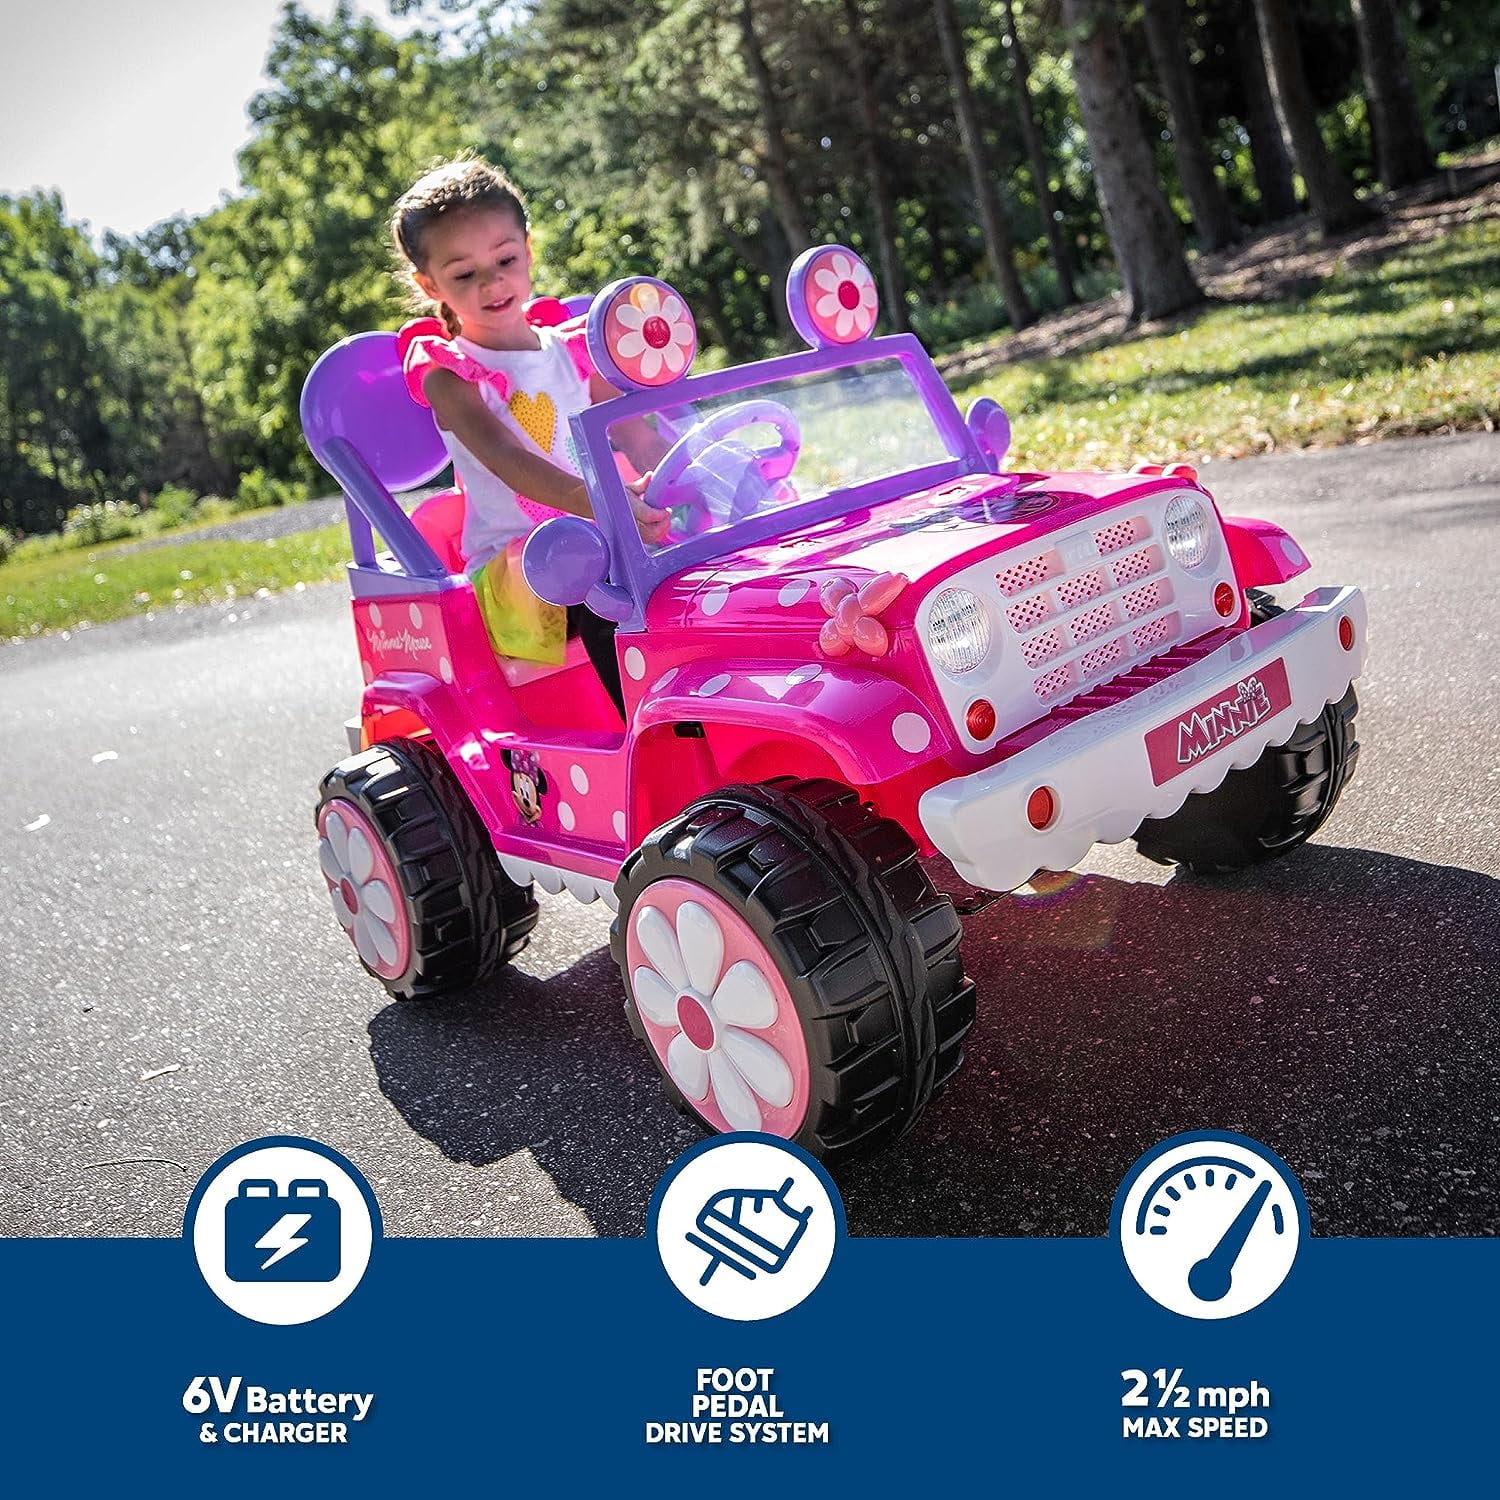 Powered Power Minnie 60 Ride-On Headlights, Kids Outdoor Trax Pink Toy, Mouse to Ride 6V 3-5 Minnie Boys Battery On, Mouse Flower Kid Up Toddler, Sounds, Toy, Girls, 4x4 and Working lbs, Disney\'s Ages